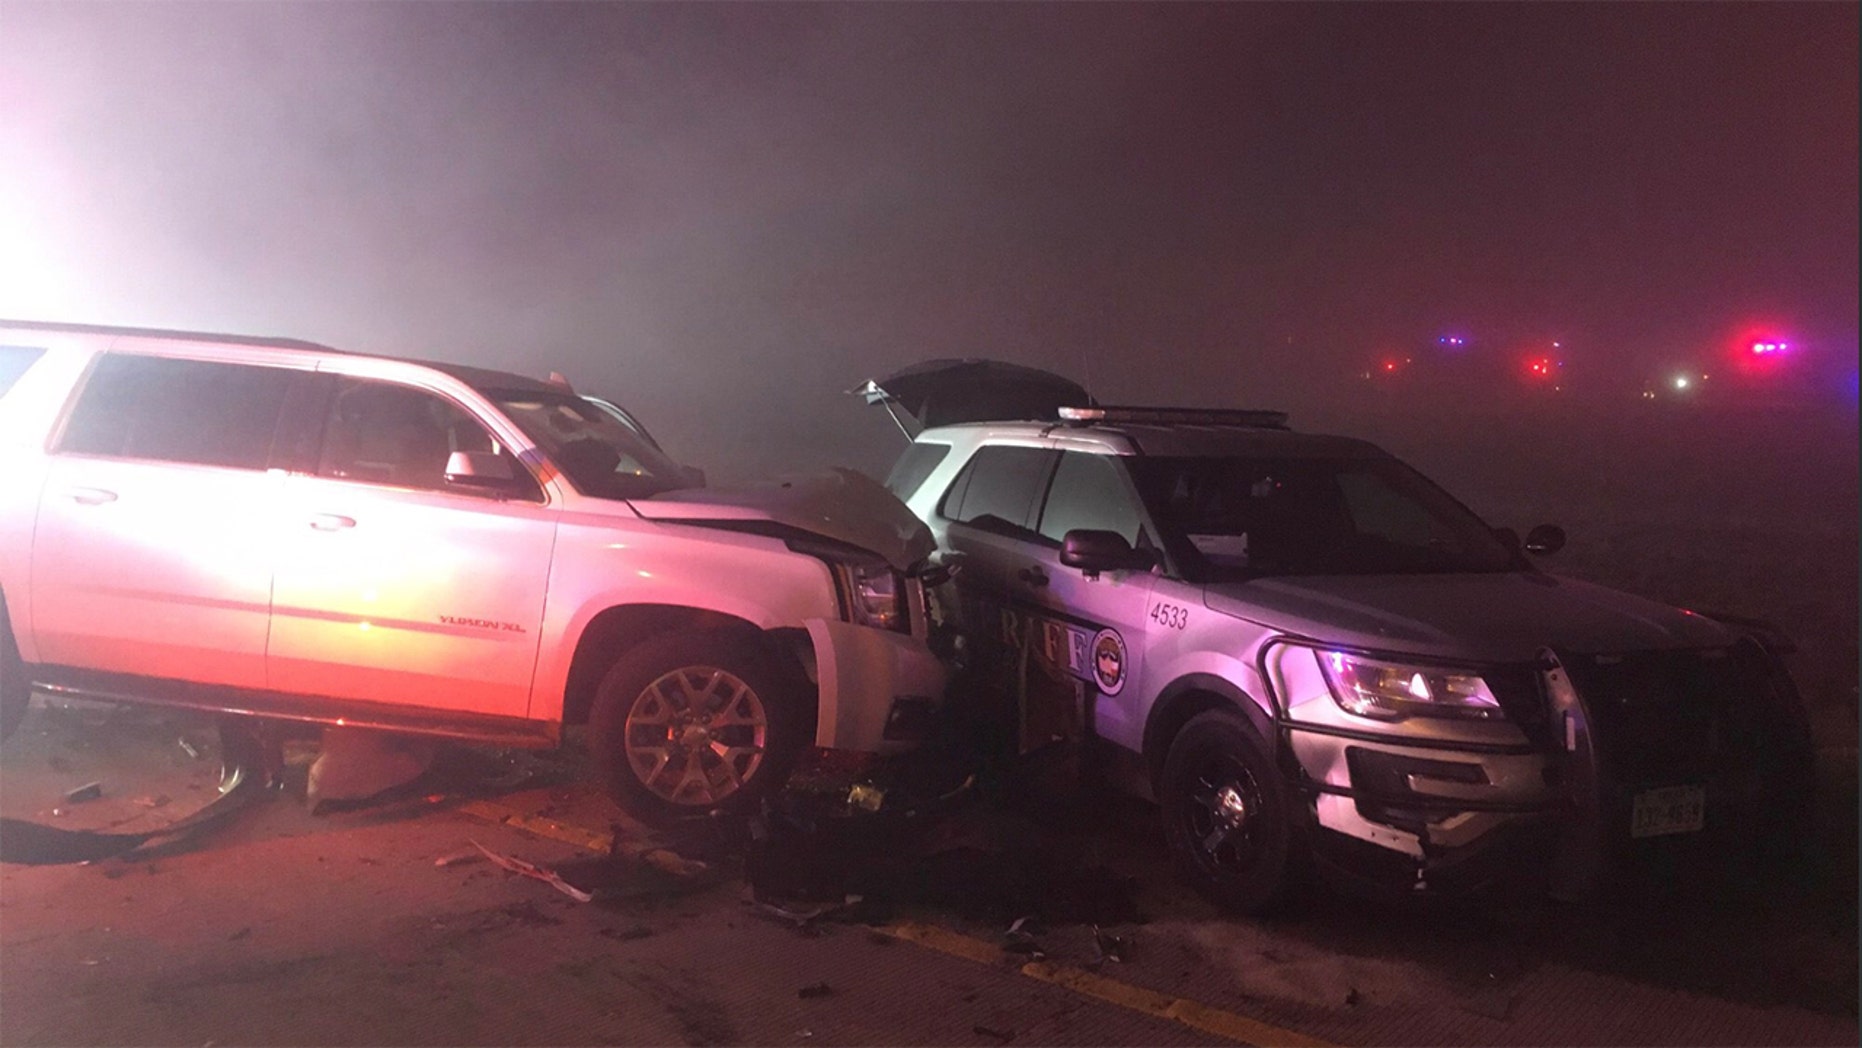 Thick fog, not booze, blamed for 35-vehicle pileup after midnight New Year